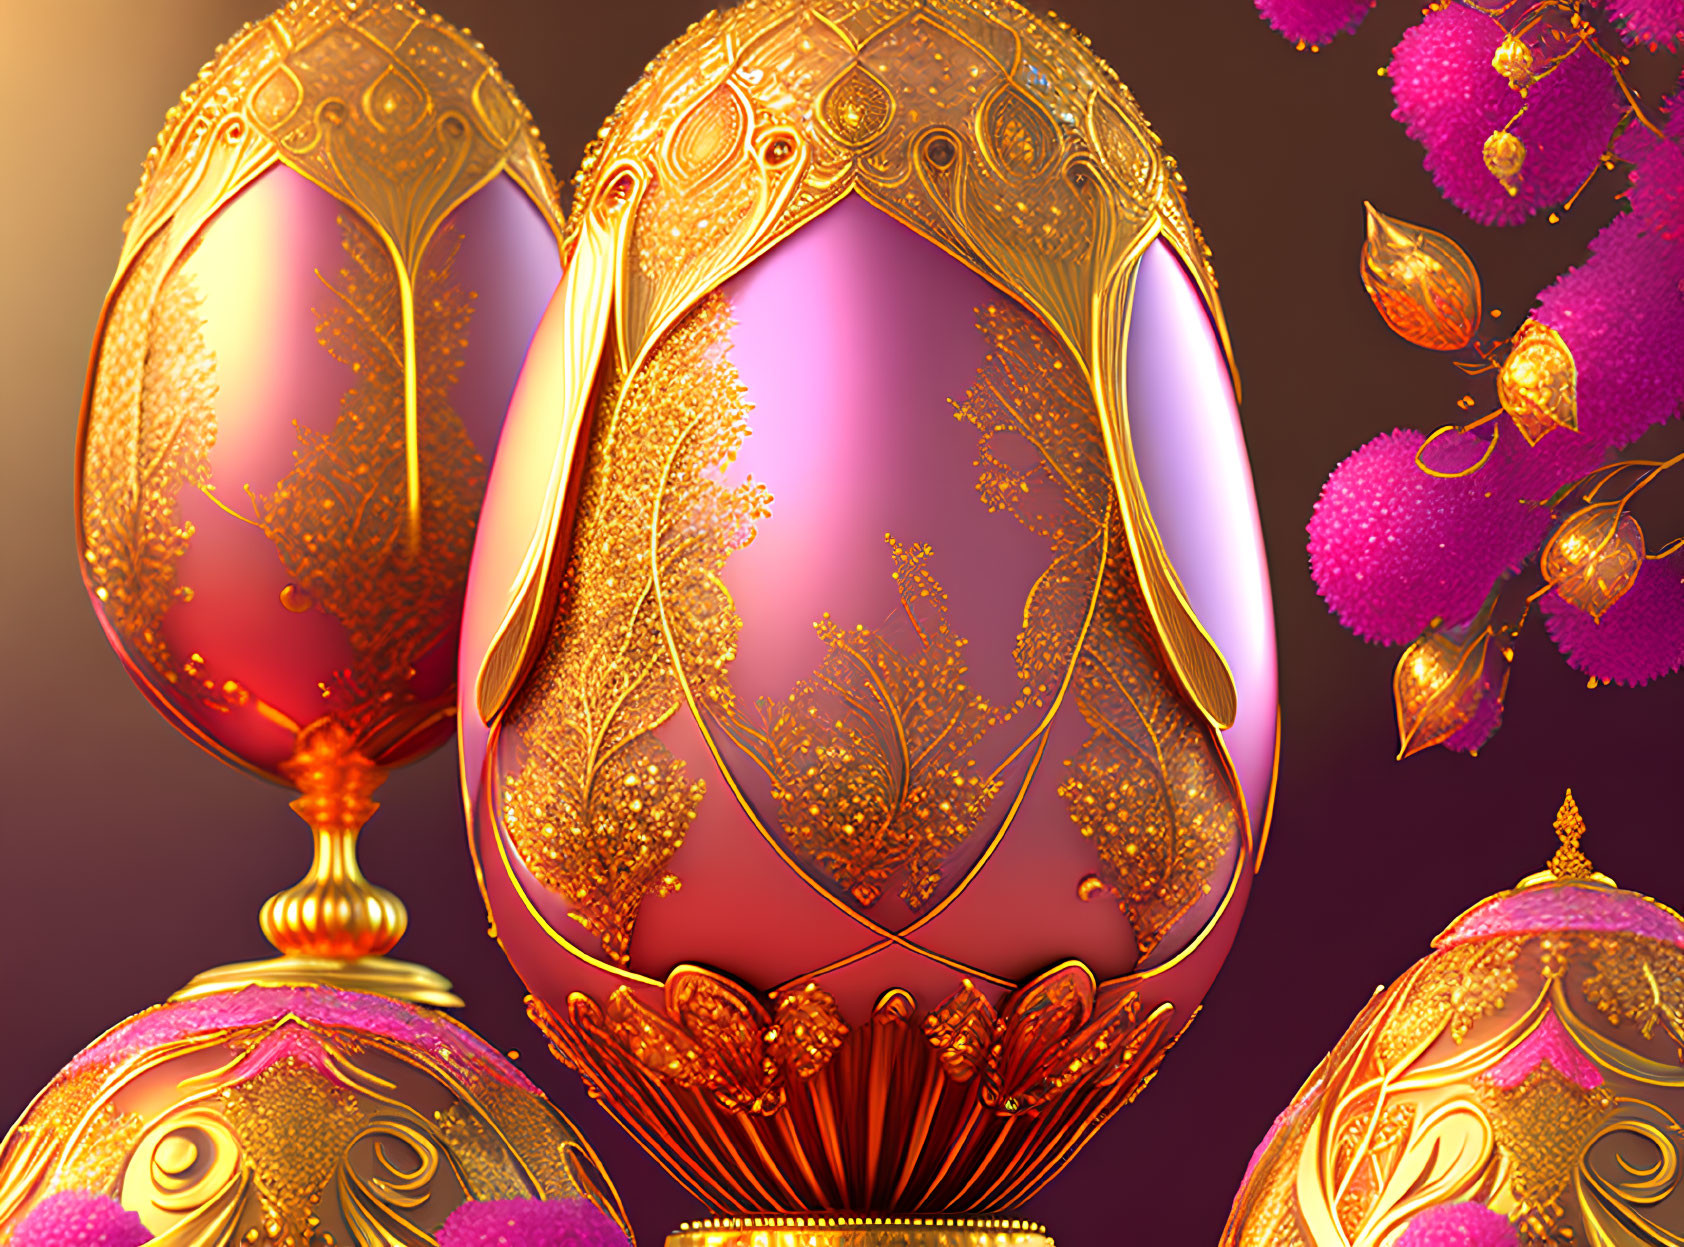 Ornate Jewel-Toned Easter Eggs with Gold Details on Dark Floral Background